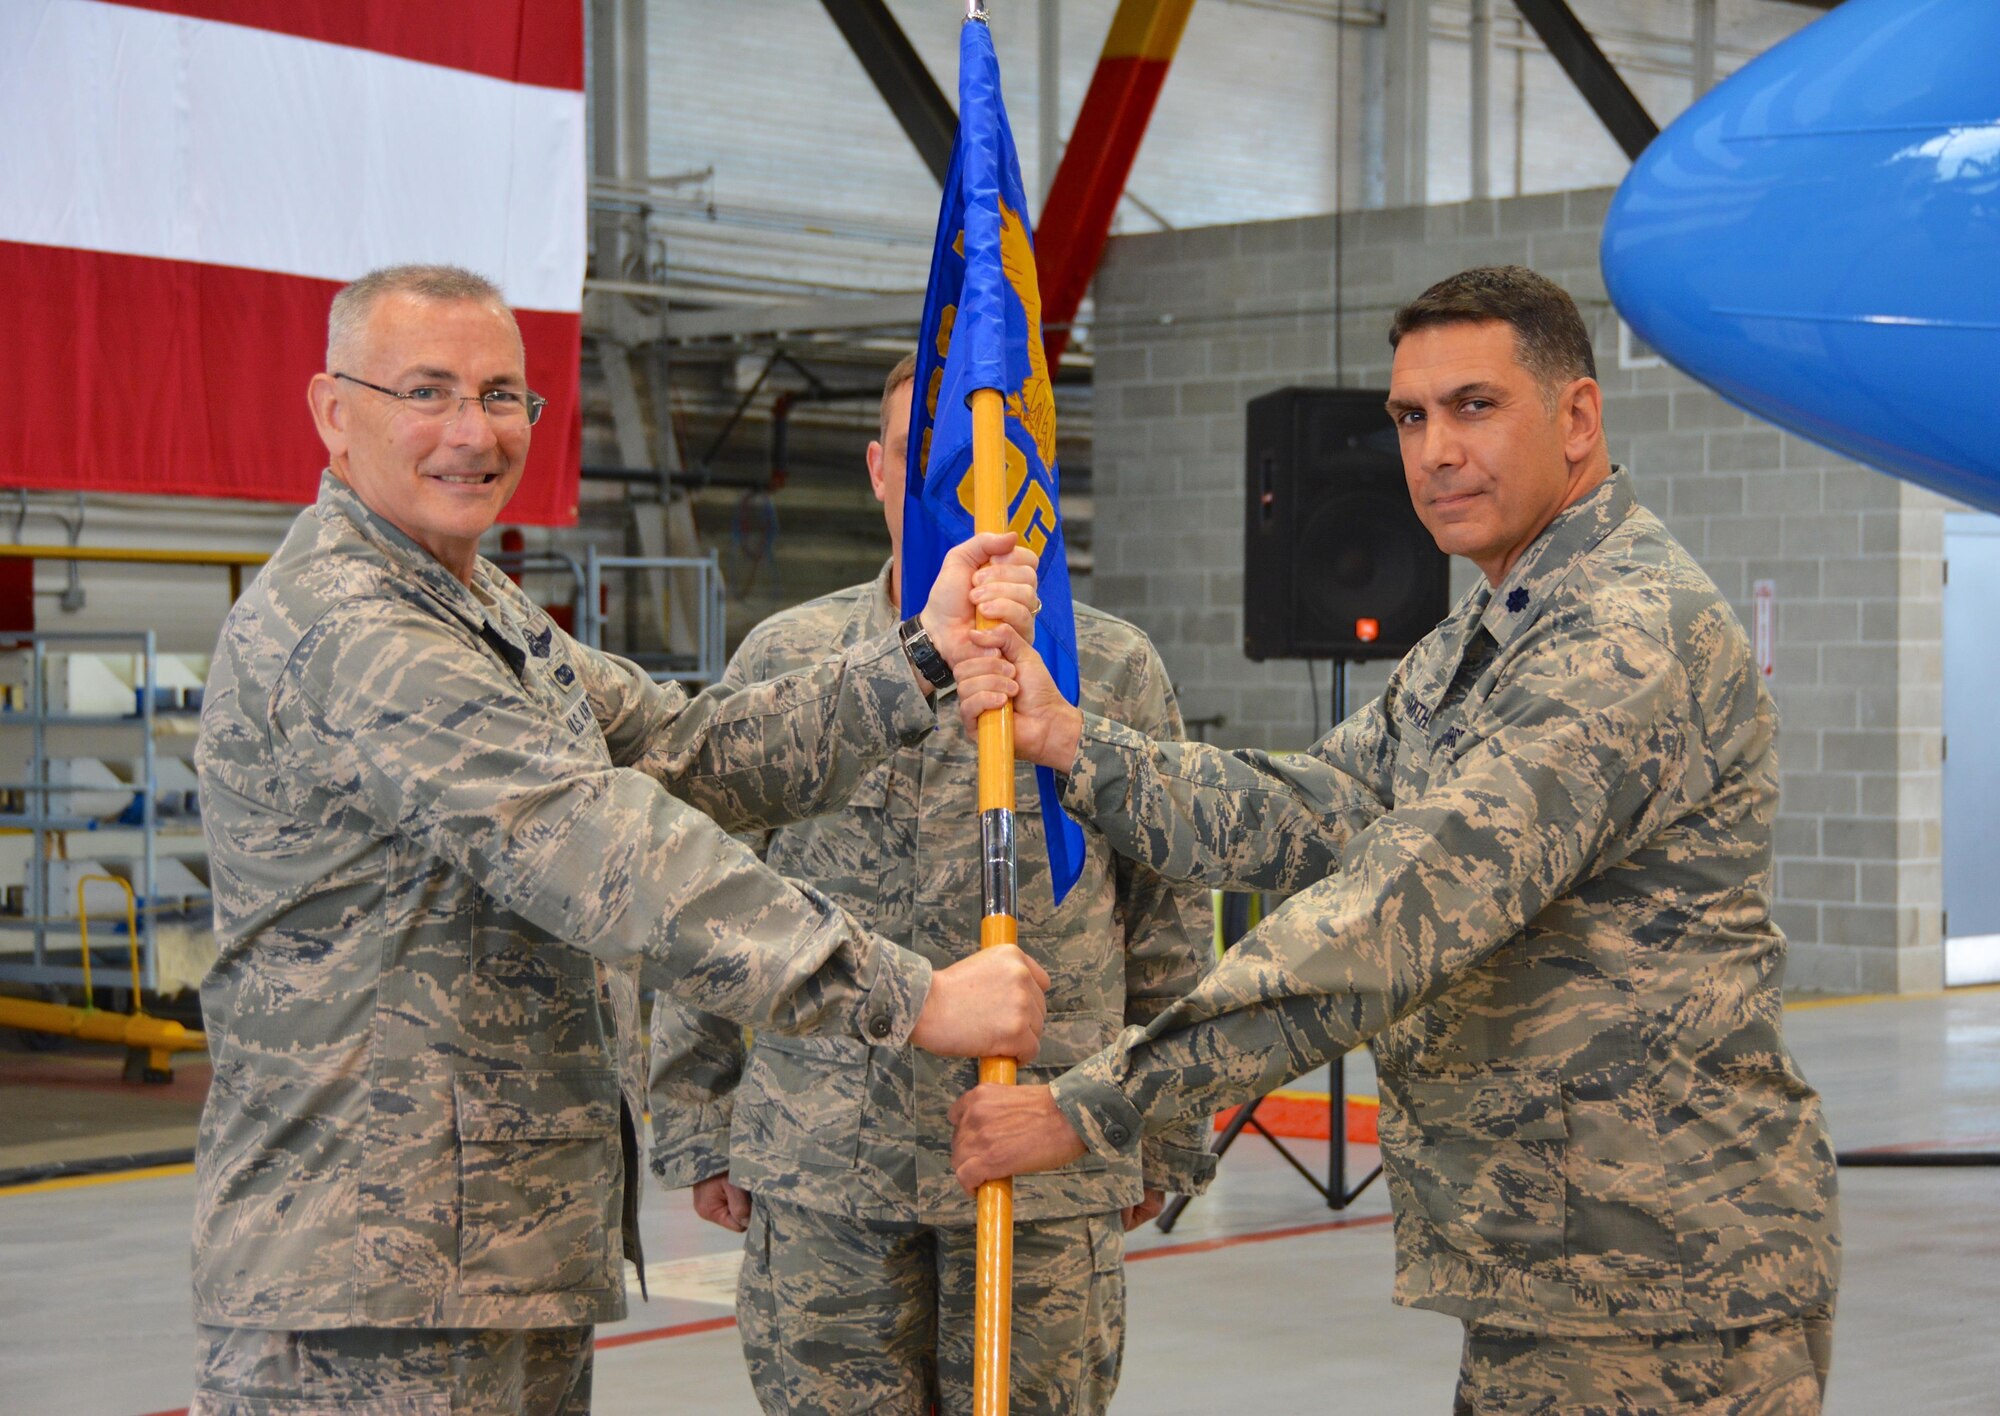 Lt. Col. Ray Smith Jr. took command of the 932nd Operations Group during a change of command ceremony April 30, 2016, at Scott Air Force Base, Ill. Prior to taking command of the 932nd OG, Smith served as director of operations for the 89th Airlift Squadron at Wright Patterson Air Force Base, Ohio. 932nd Airlift Wing Commander Col. Jonathan Philebaum, left, presented the unit's guidon to Smith in keeping with Air Force ceremonial tradition. (U.S. Air Force photo by Tech. Sgt. Jodi Ames) 